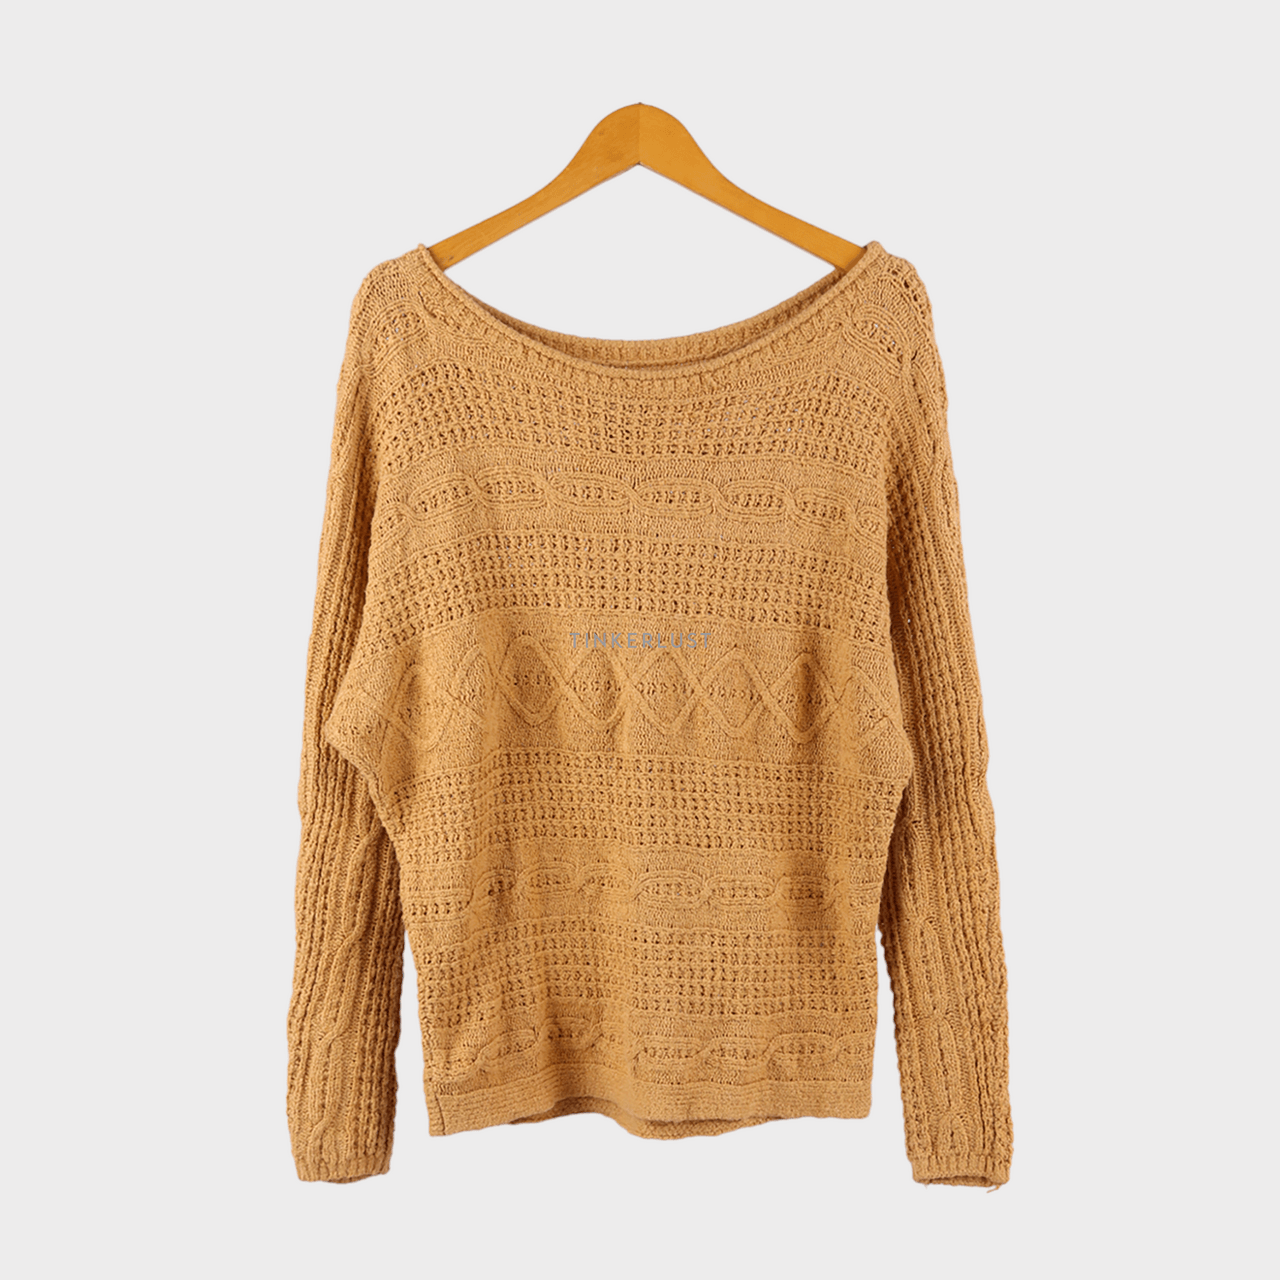 Abercrombie & Fitch Soft Mustard Sweater